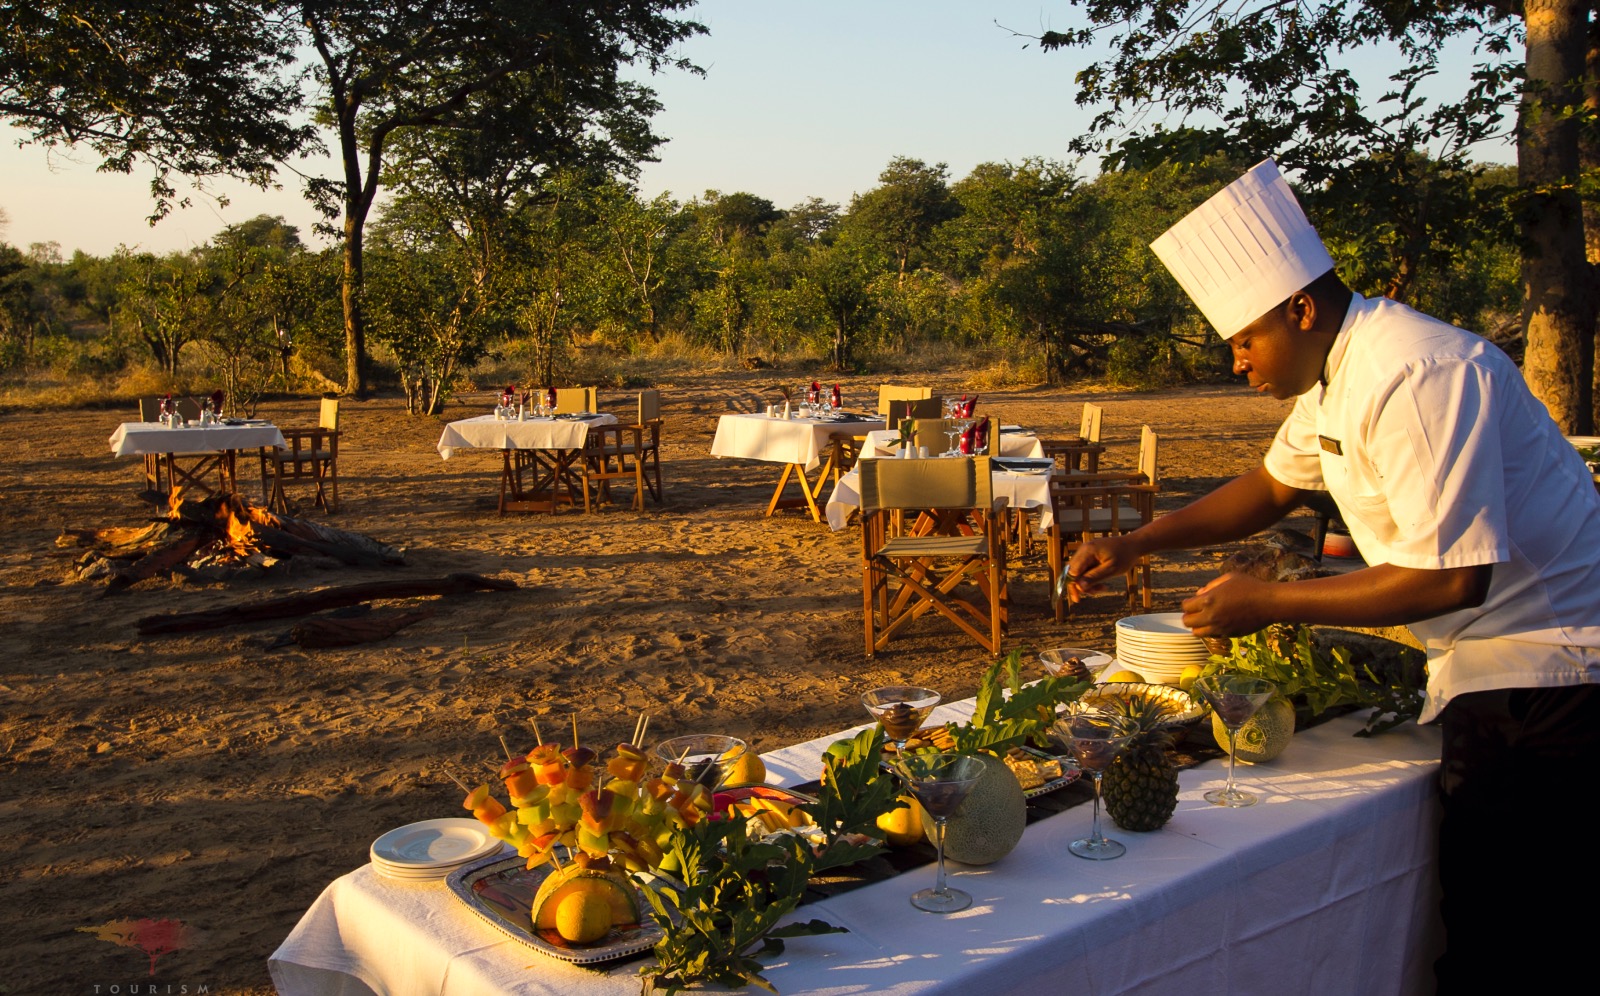 A chef puts finishing touches on the table at a bush dinner in Botswana.